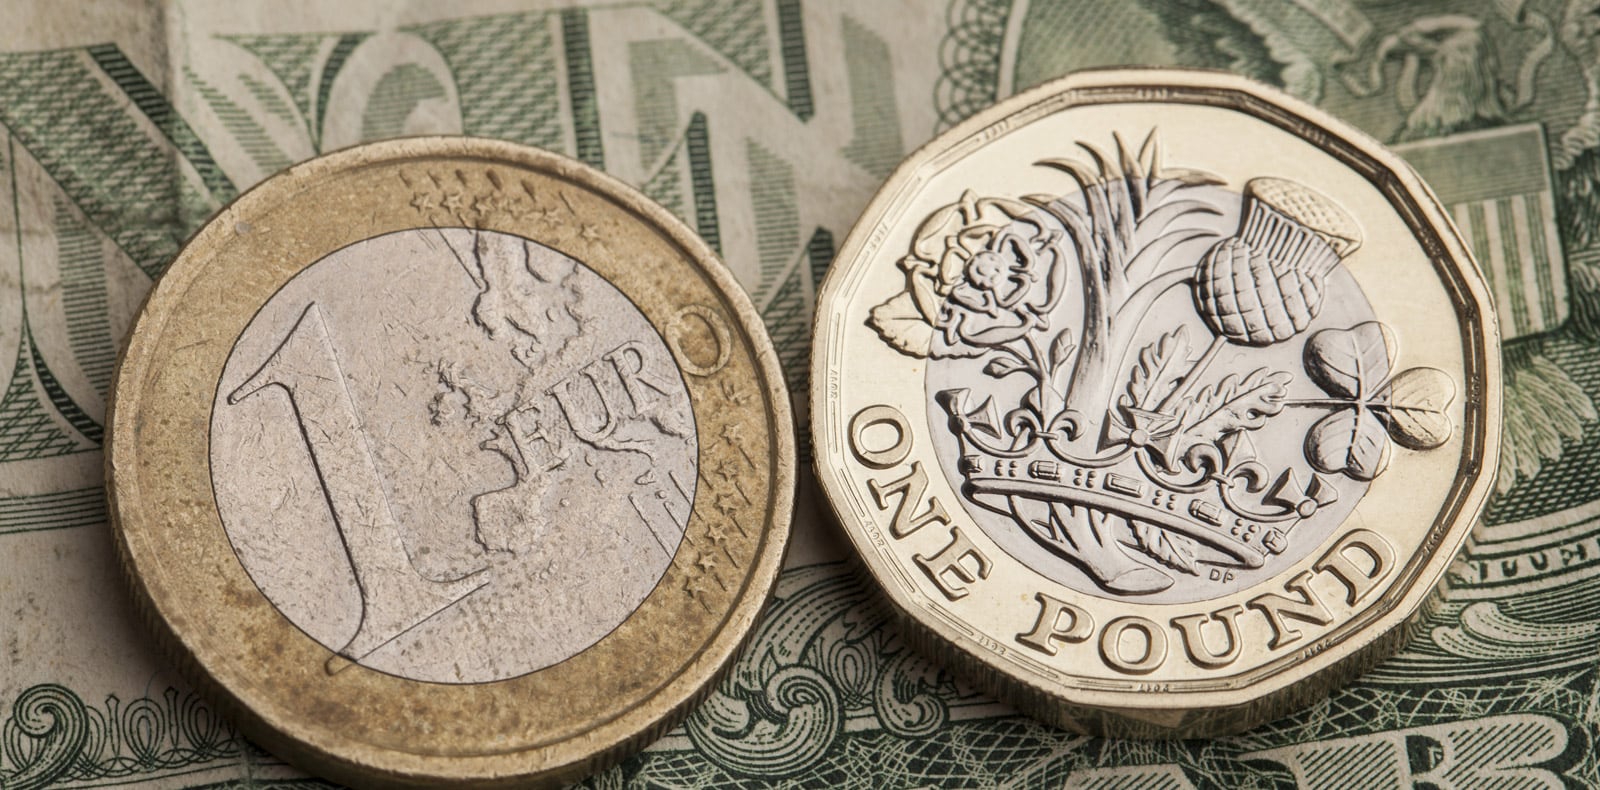 Comments Surrounding Inflation Give the Sterling a Boost